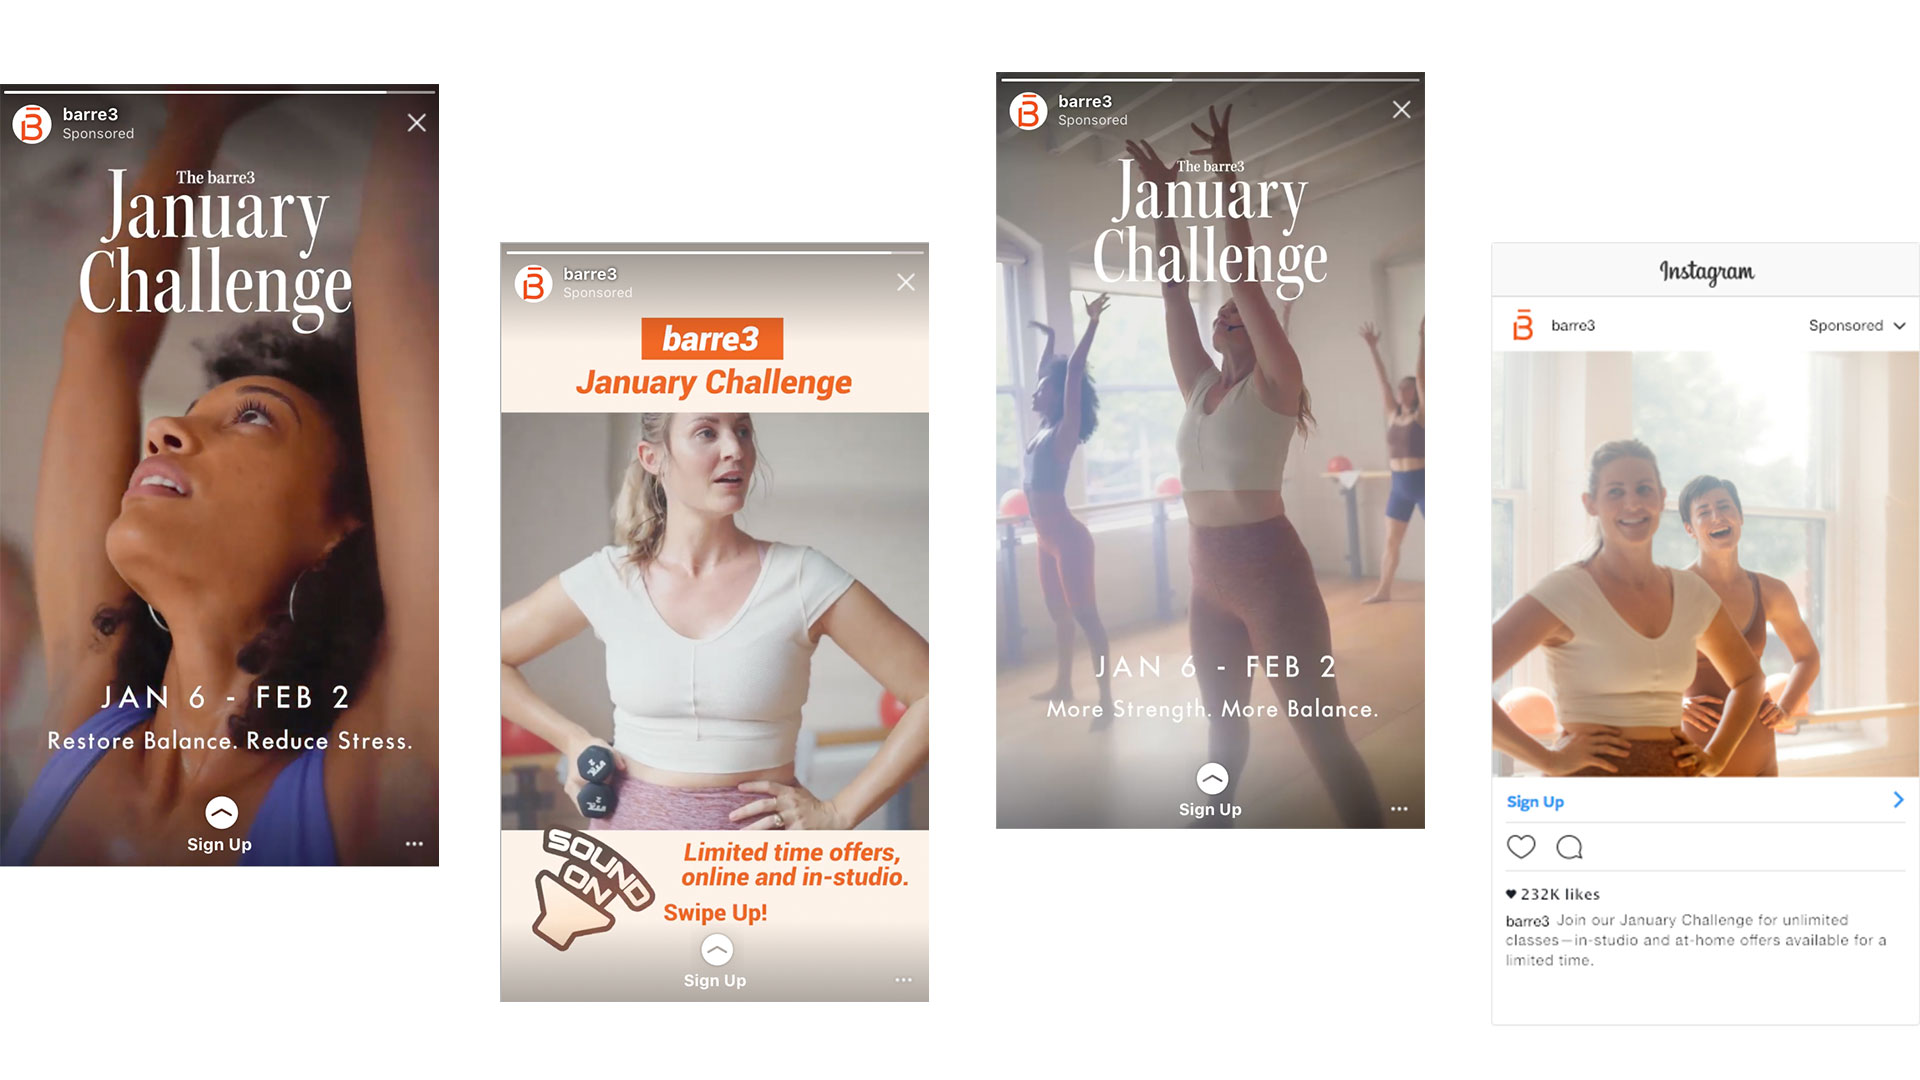 Examples of the barre3 paid social ads as a part of their January Challenge campaign.